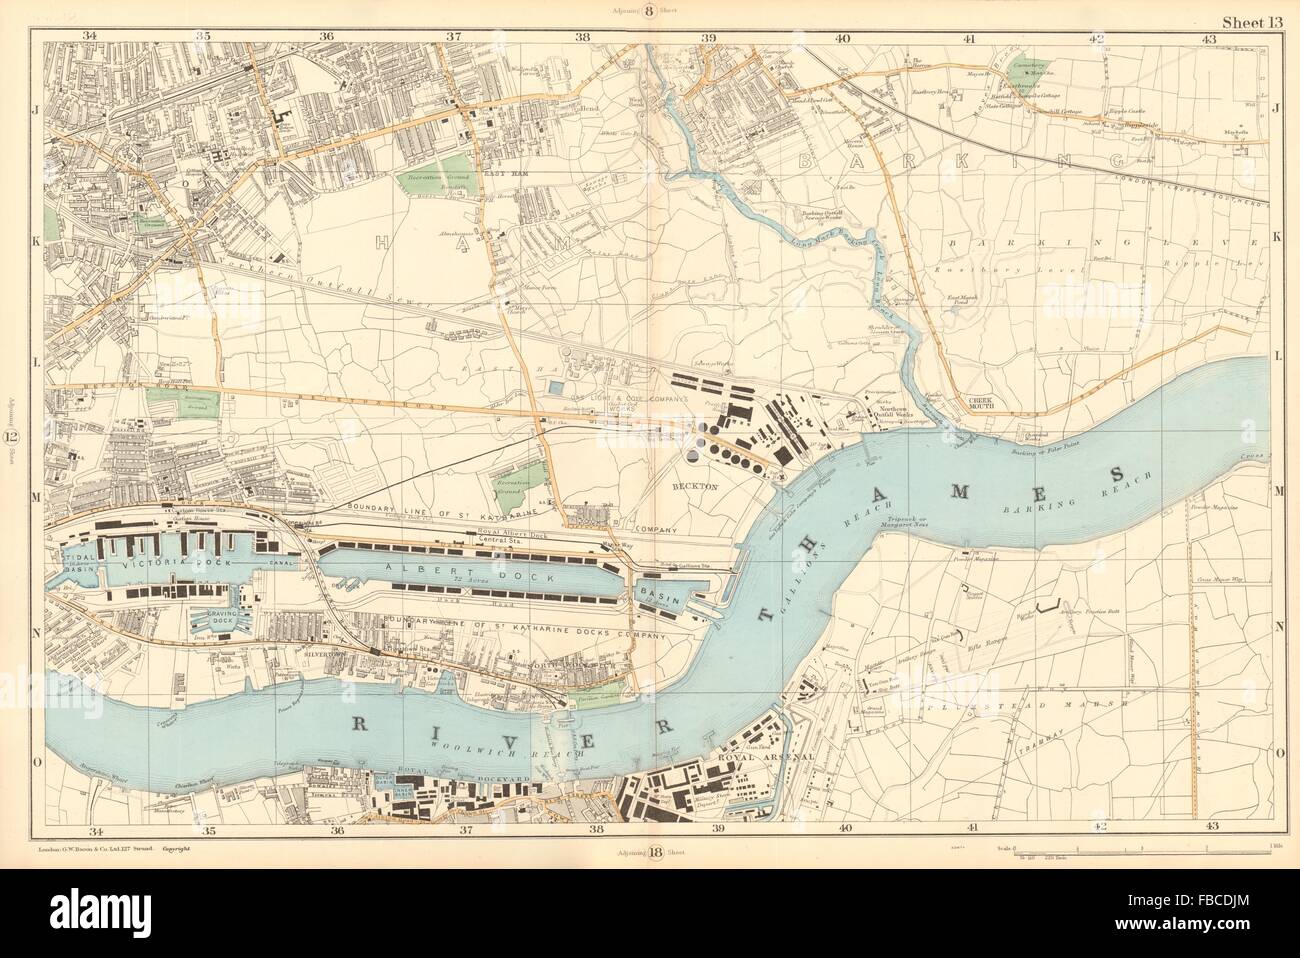 Ovest/Est prosciutto & BARKING Plaistow Woolwich Thamesmead Beckton. BACON , 1903 mappa Foto Stock